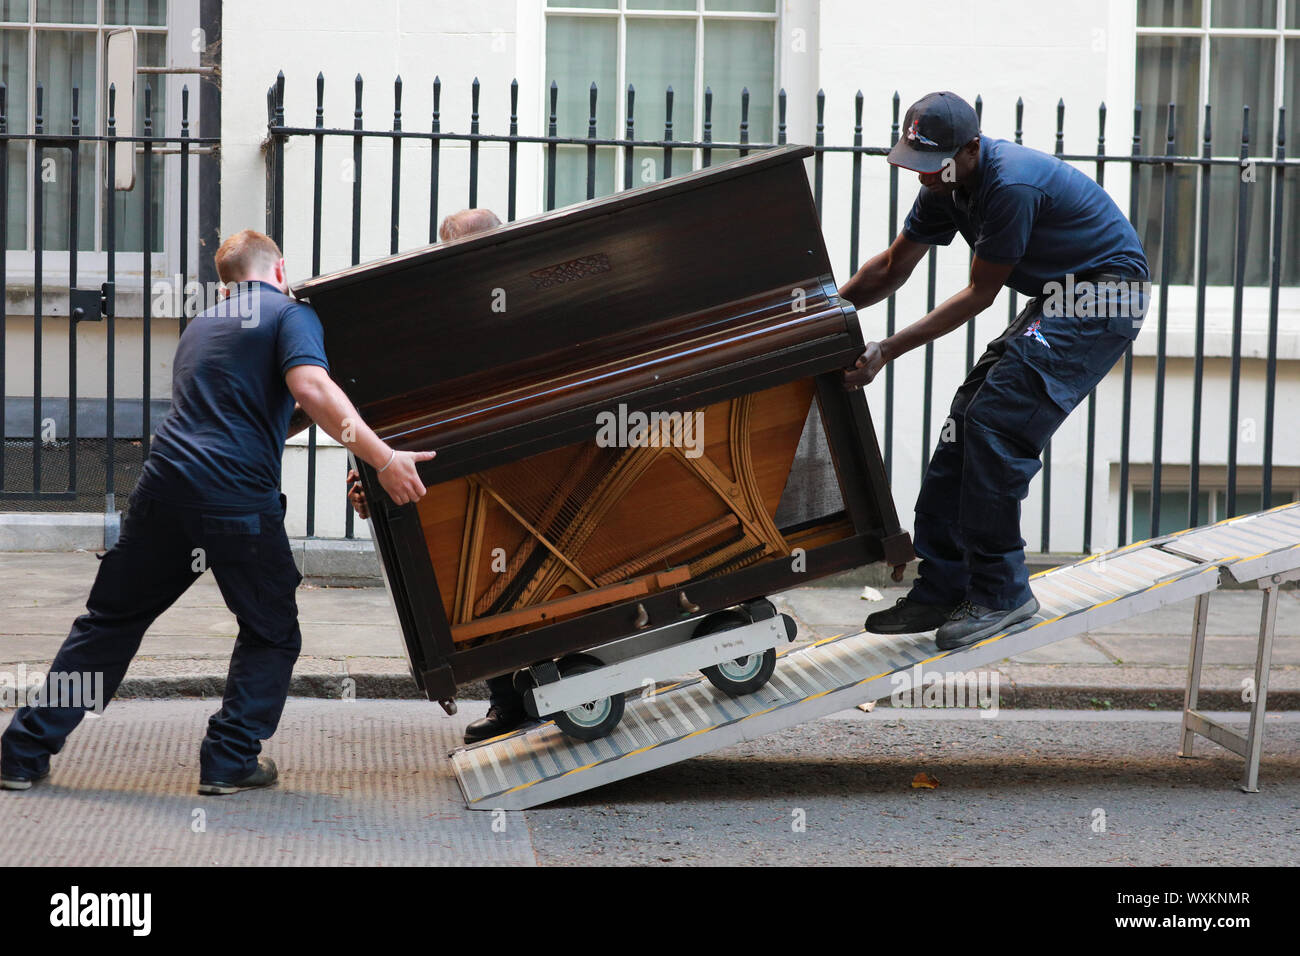 Westminster, London, UK. 17th Sep, 2019. Two delivery men struggle with the large musical instrument. A piano is delivered to No 11, Downing Street by a removal firm. The flat above No 11 is believed to now be the official residence of PM Johnson. Credit: Imageplotter/Alamy Live News Stock Photo